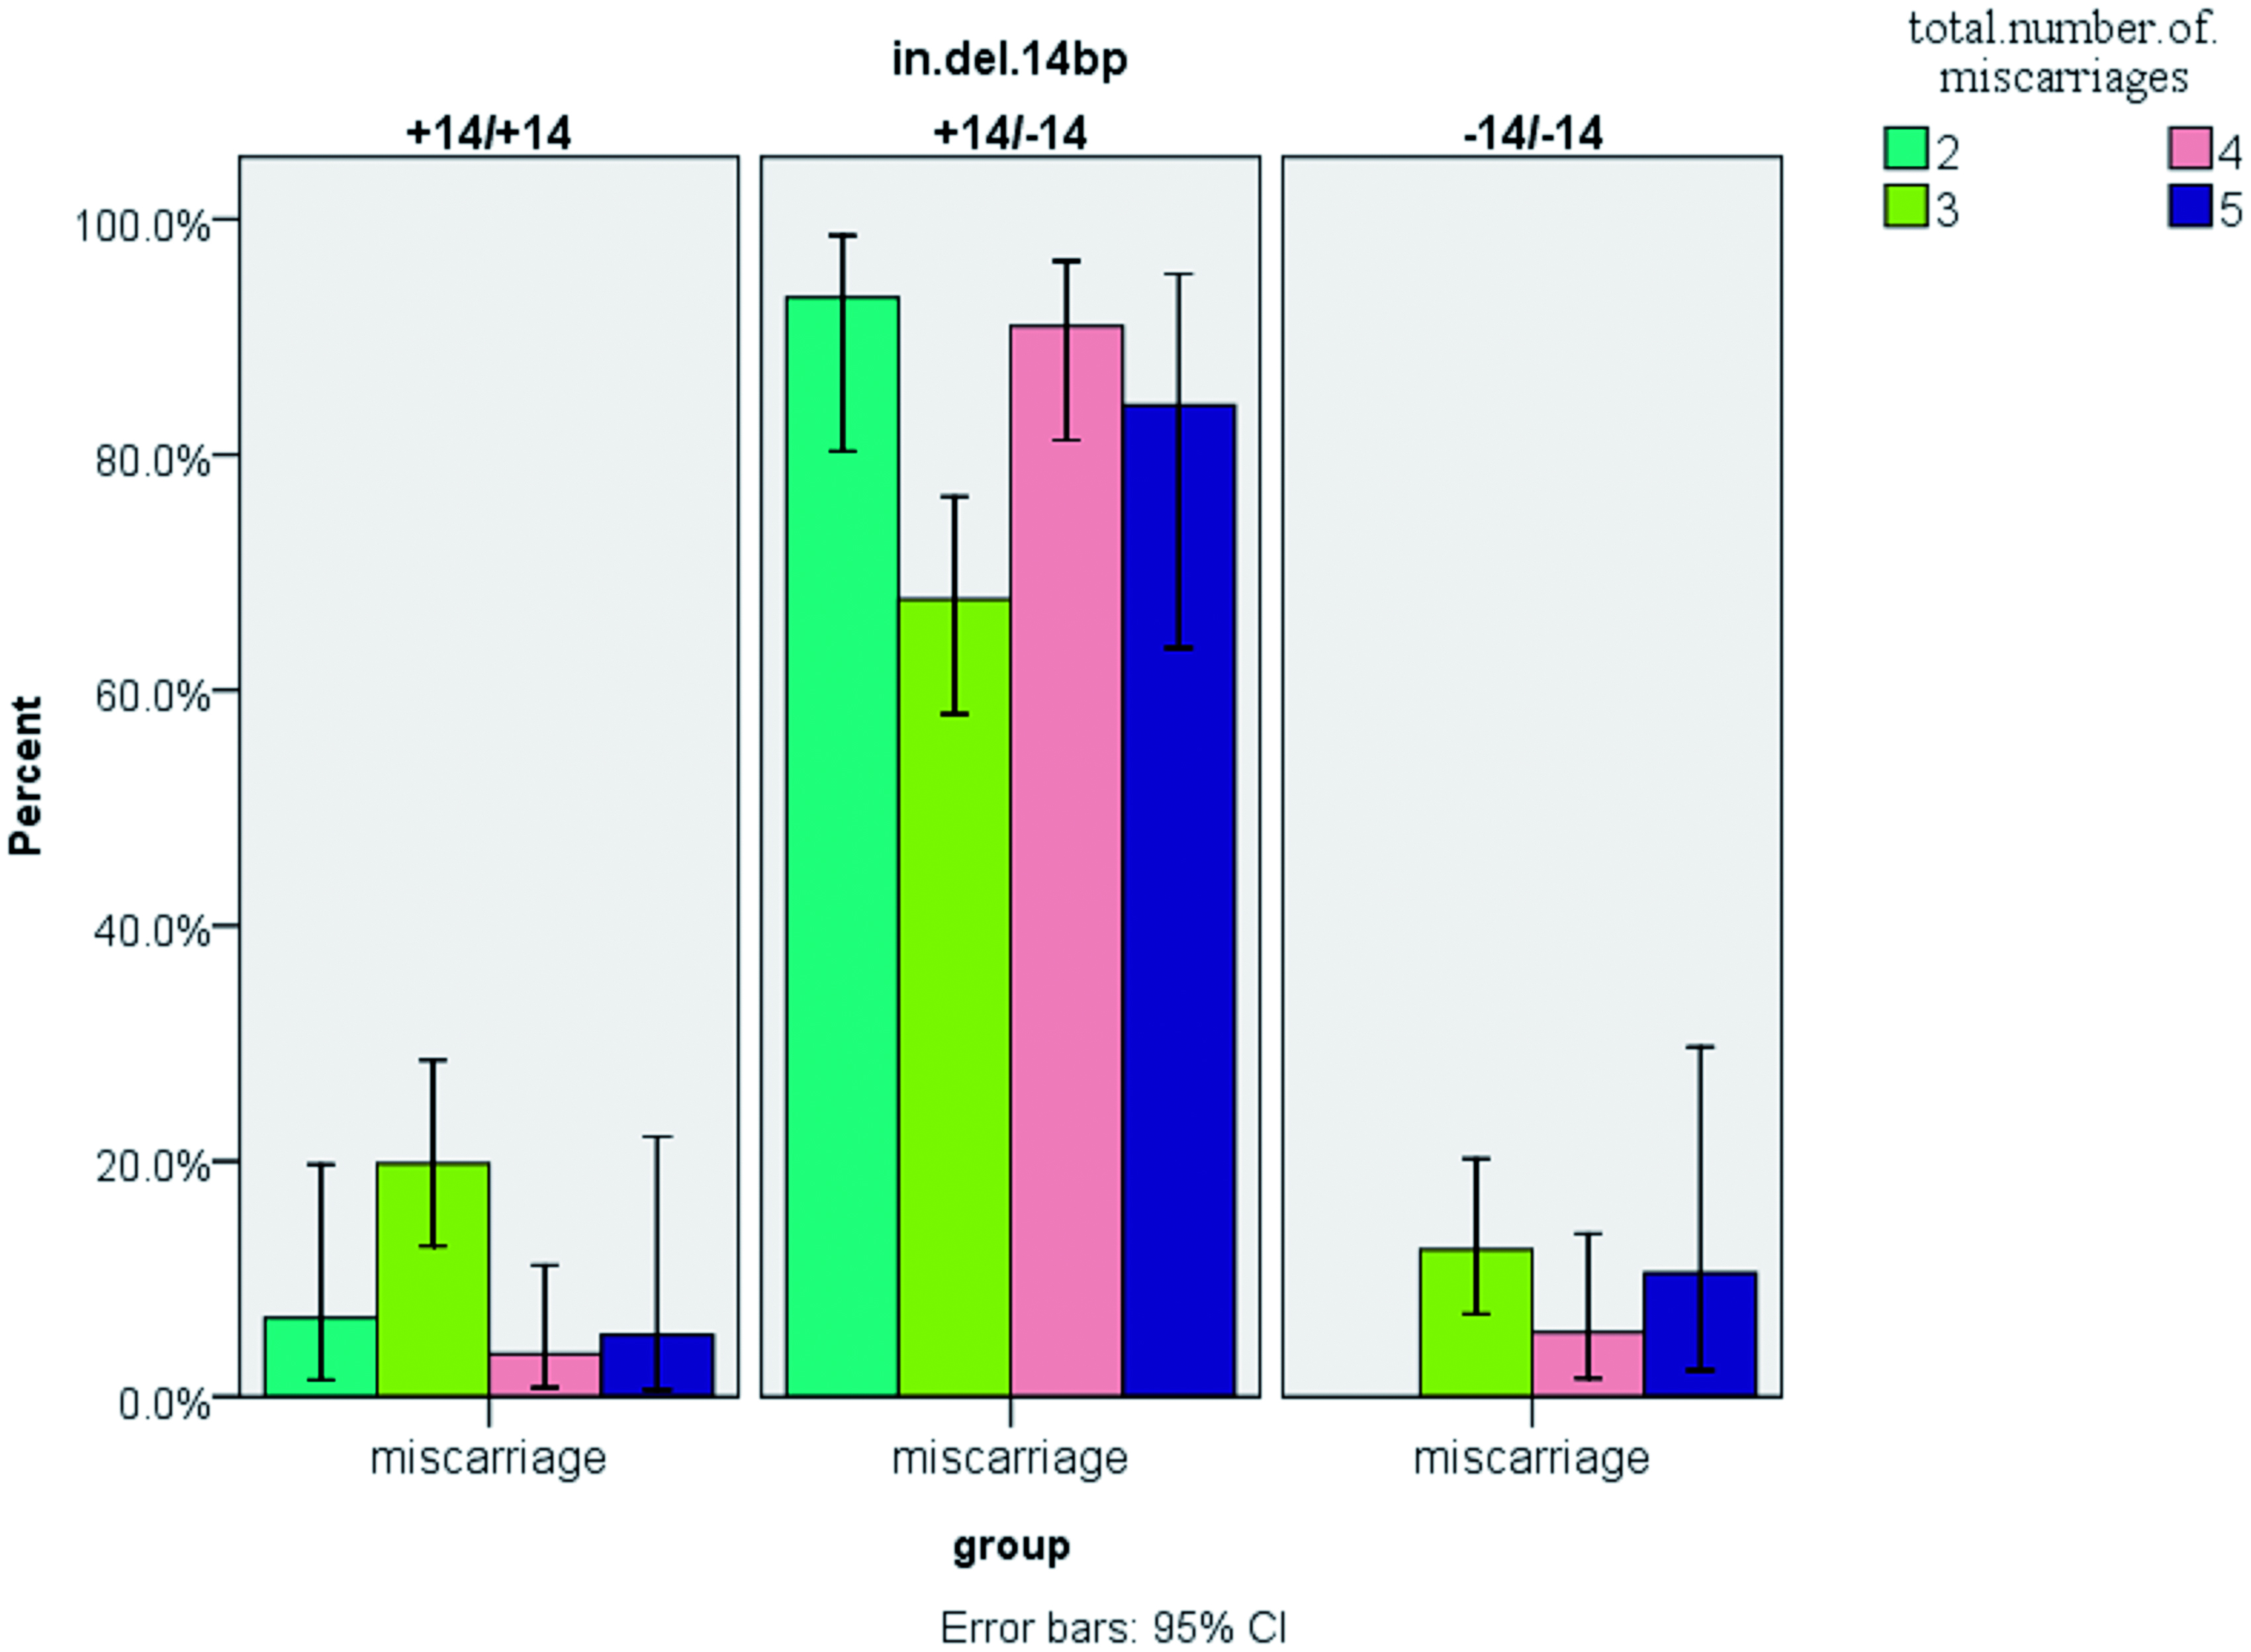 Figure 4. Comparison of genotype frequencies in the context of total miscarriage number. For the three common genotypes, there were significantly more women with the heterozygous genotype that experienced 2–5 miscarriages. Values shown are mean ± SD. At any of the fixed number of miscarriages, all values in the heterozygous group were significantly (p < 0.05) greater than those in either heterozygous group. For n = 200 RM subjects; actual numbers of subjects with 2, 3, 4 or 5 events were, respectively, 30, 96, 55 and 19.